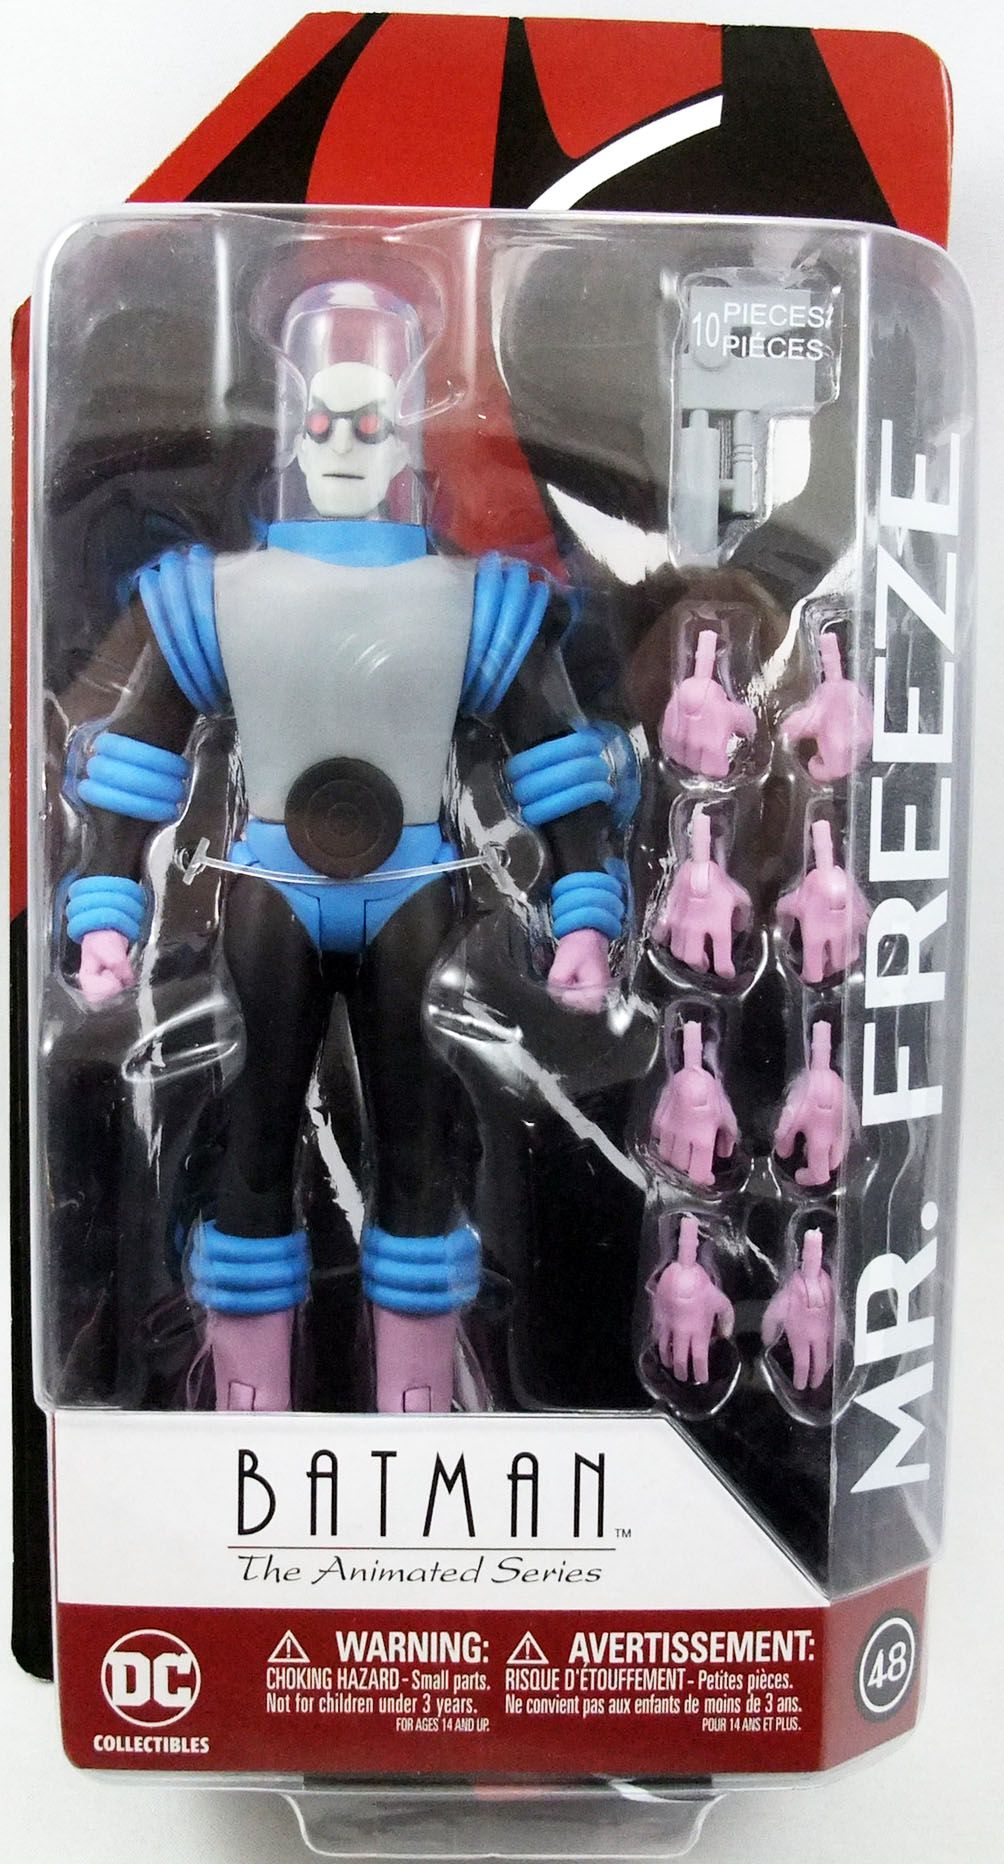 FREEZE MR 7" Action Figure IN STOCK NEW 10 pc DC Batman The Animated Series 